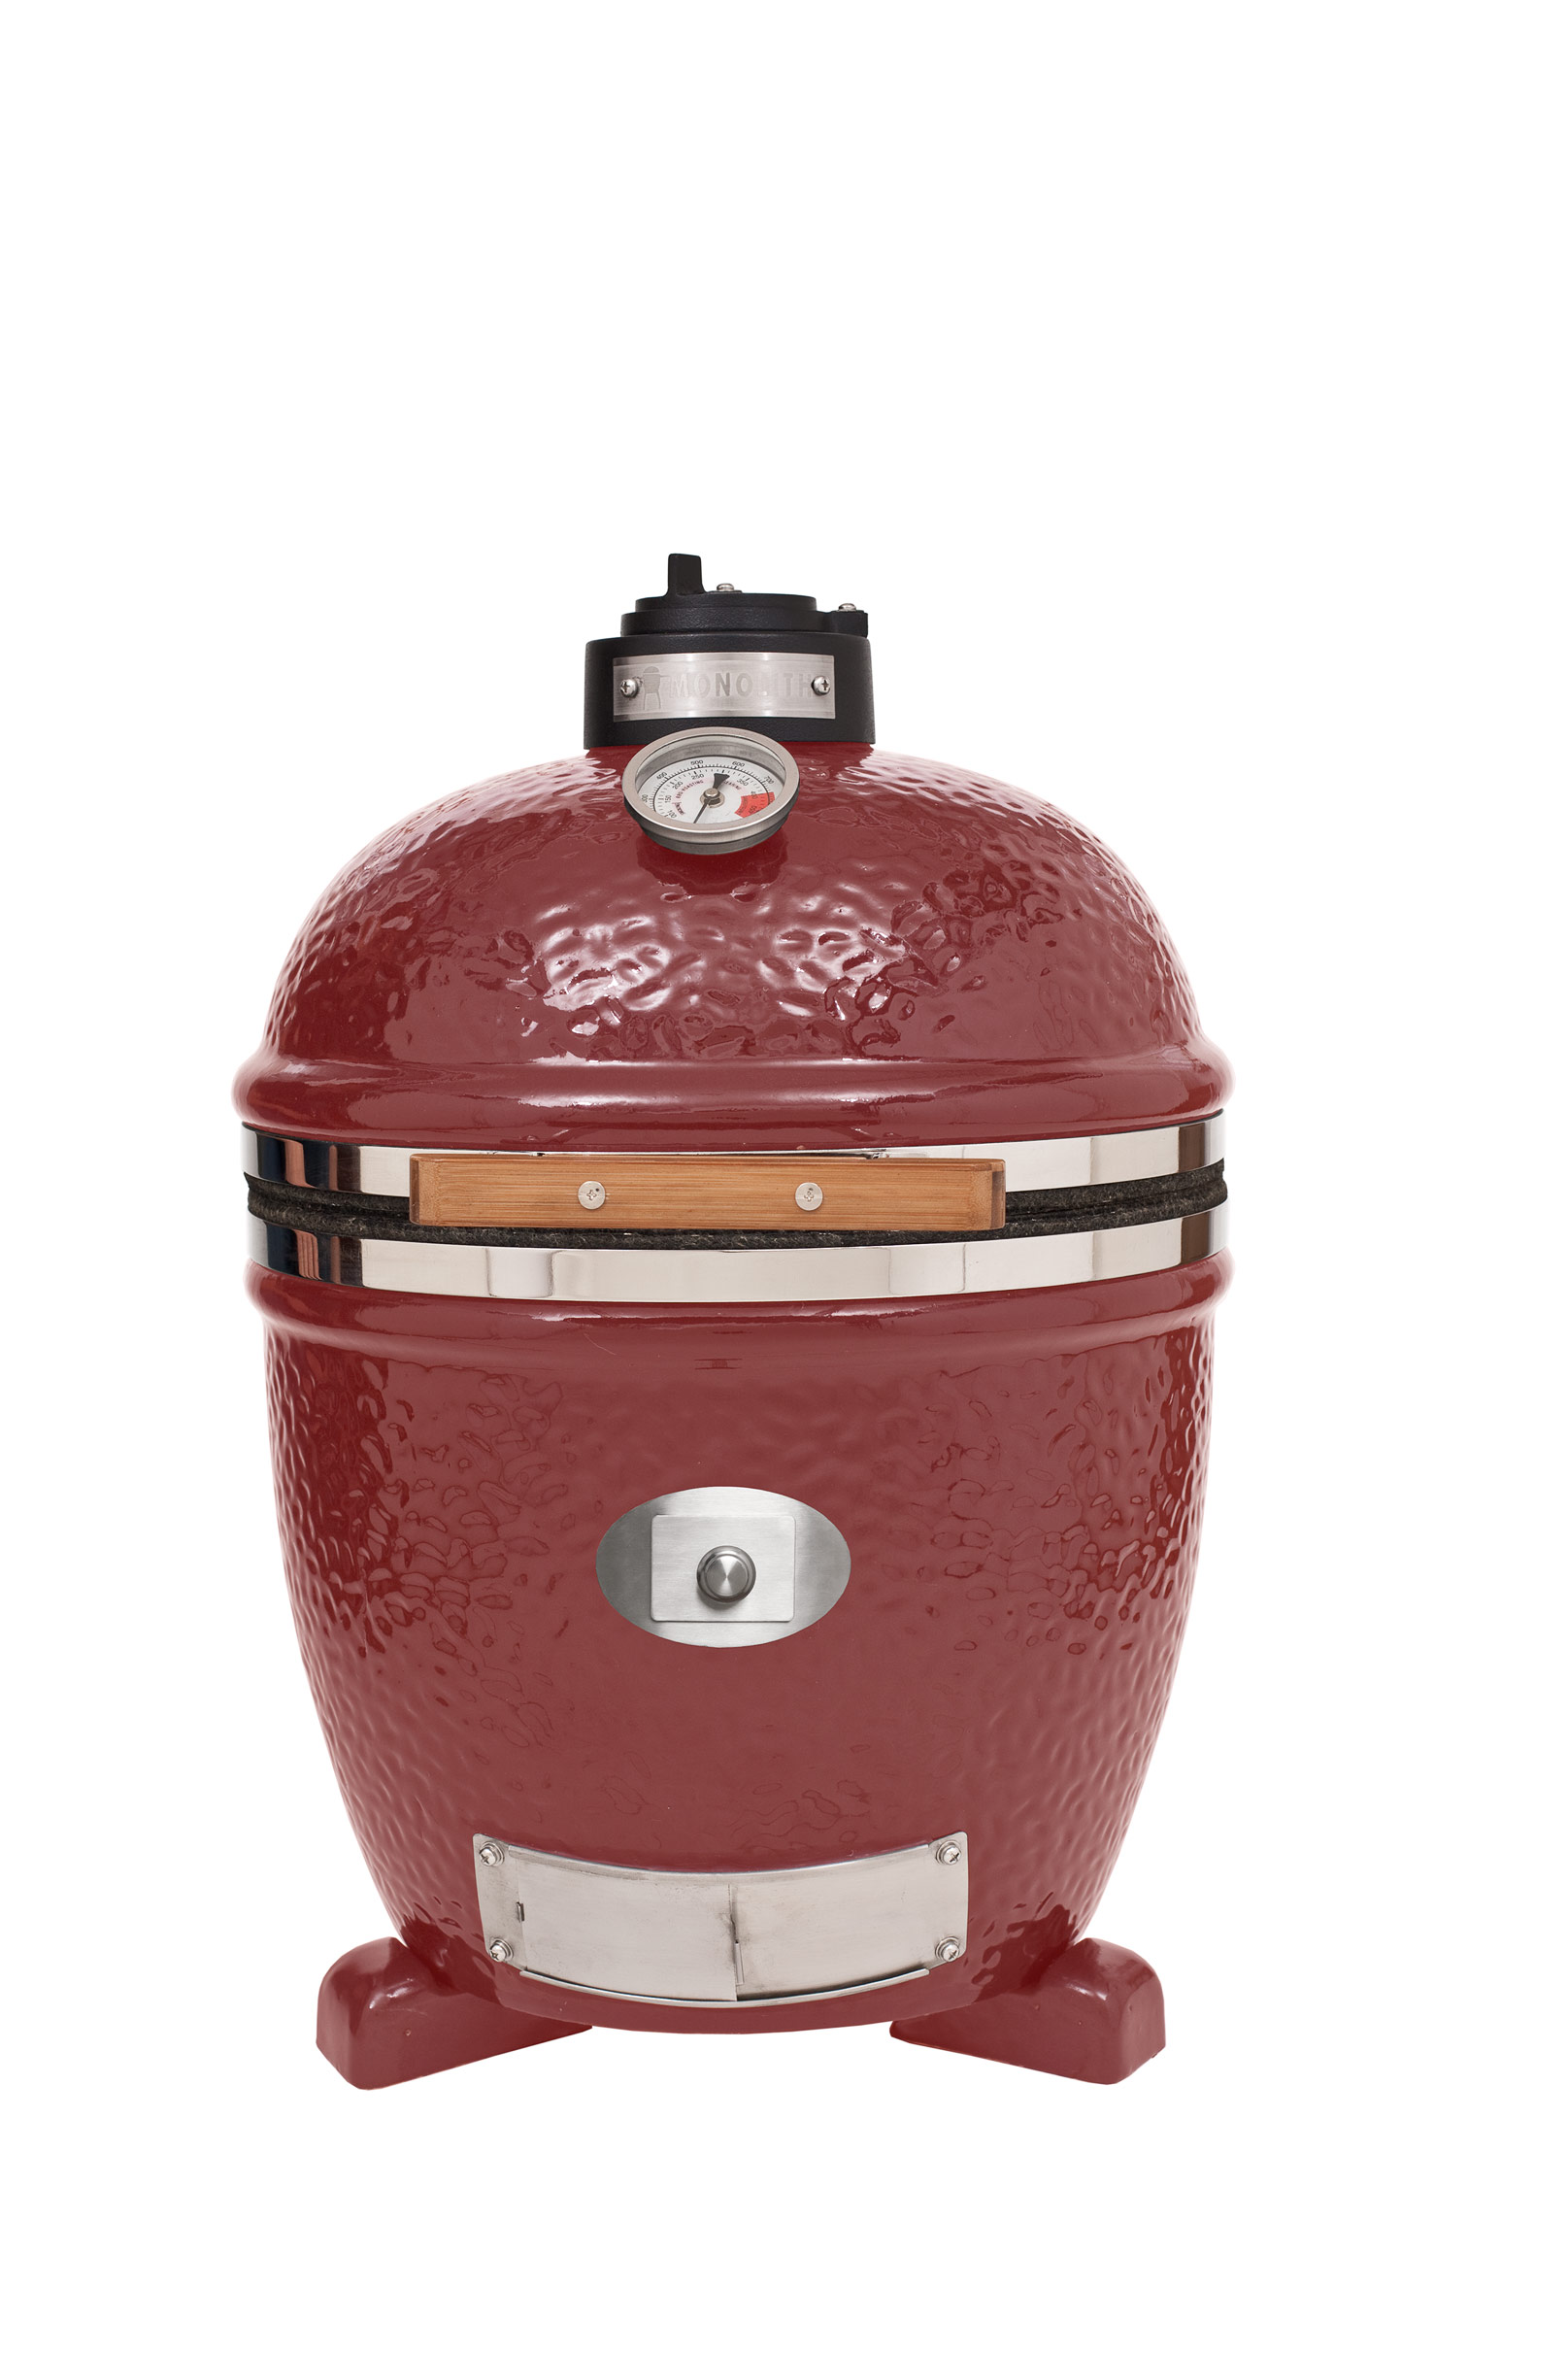 Monolith LeChef Kamado Grill red